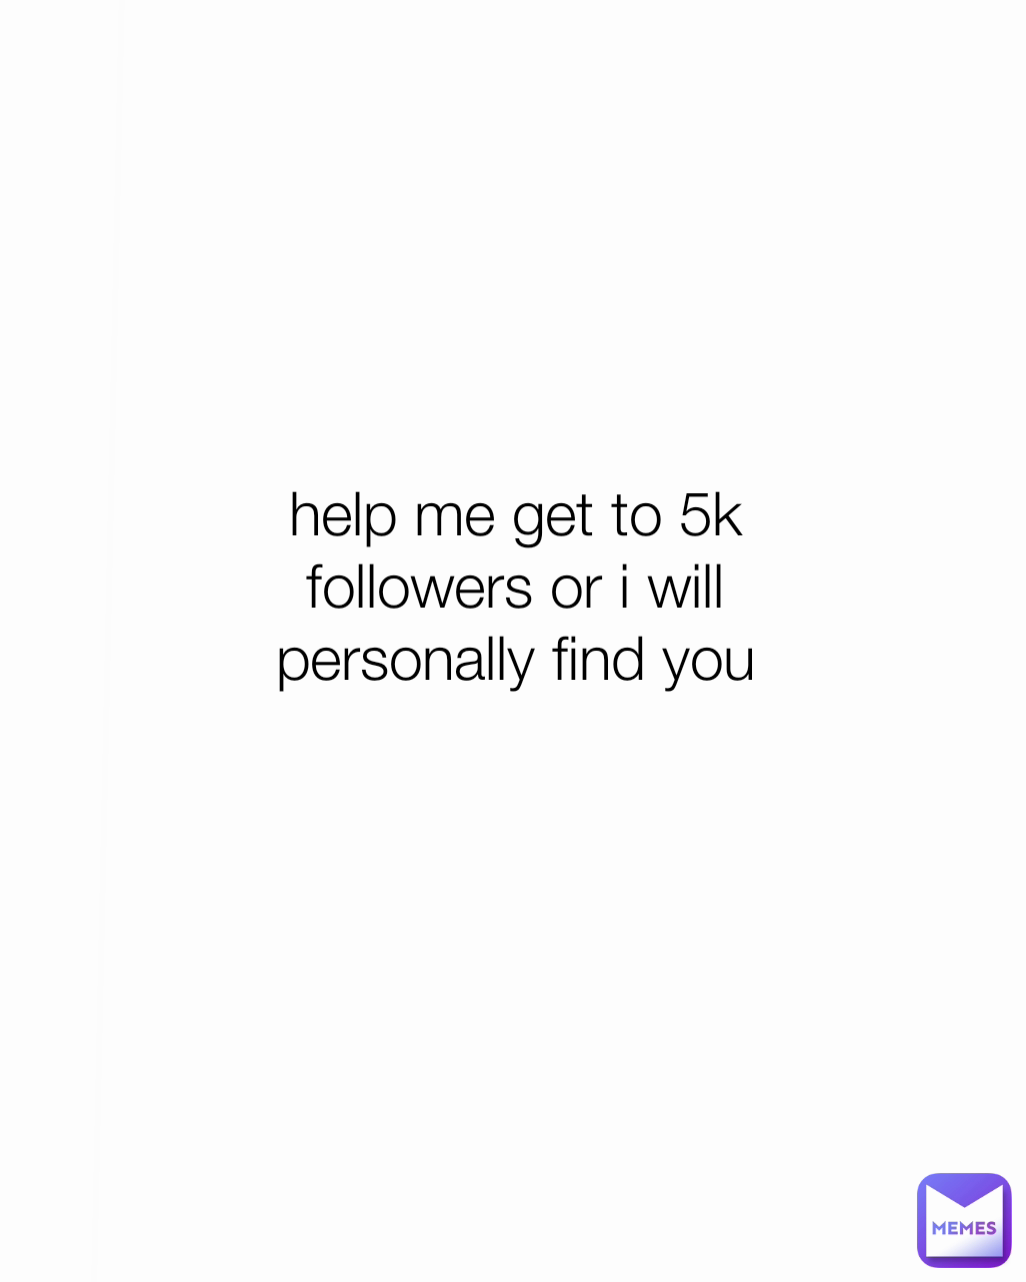 help me get to 5k followers or i will personally find you